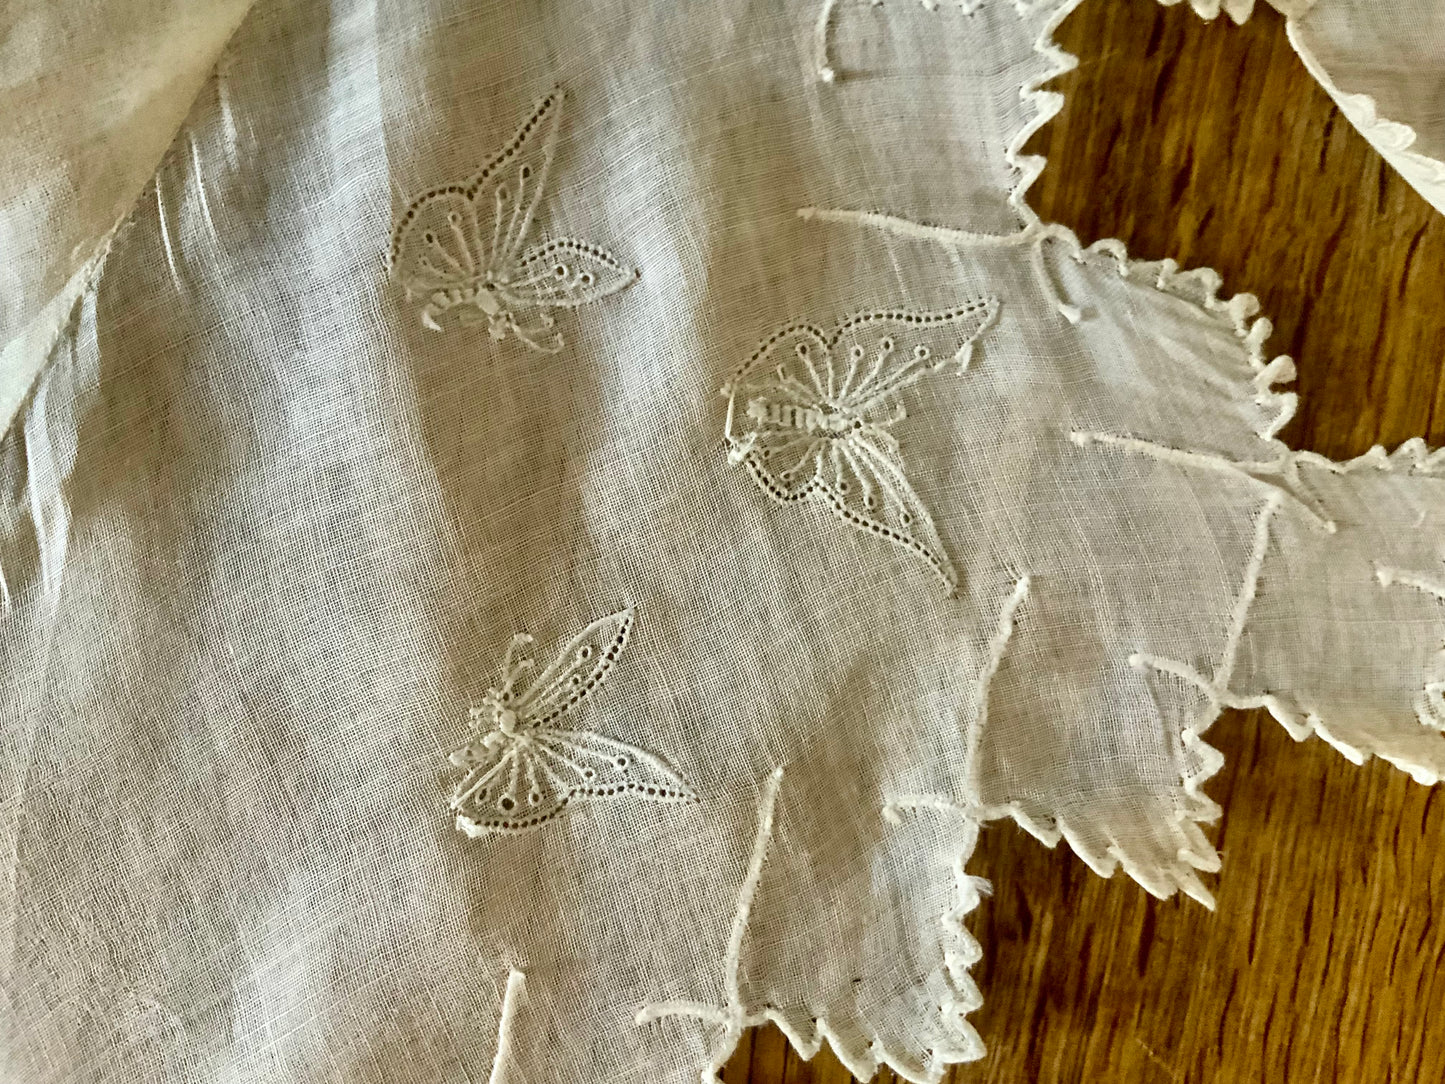 Antique Cotton Collar -Embroidered Butterflies - 1920